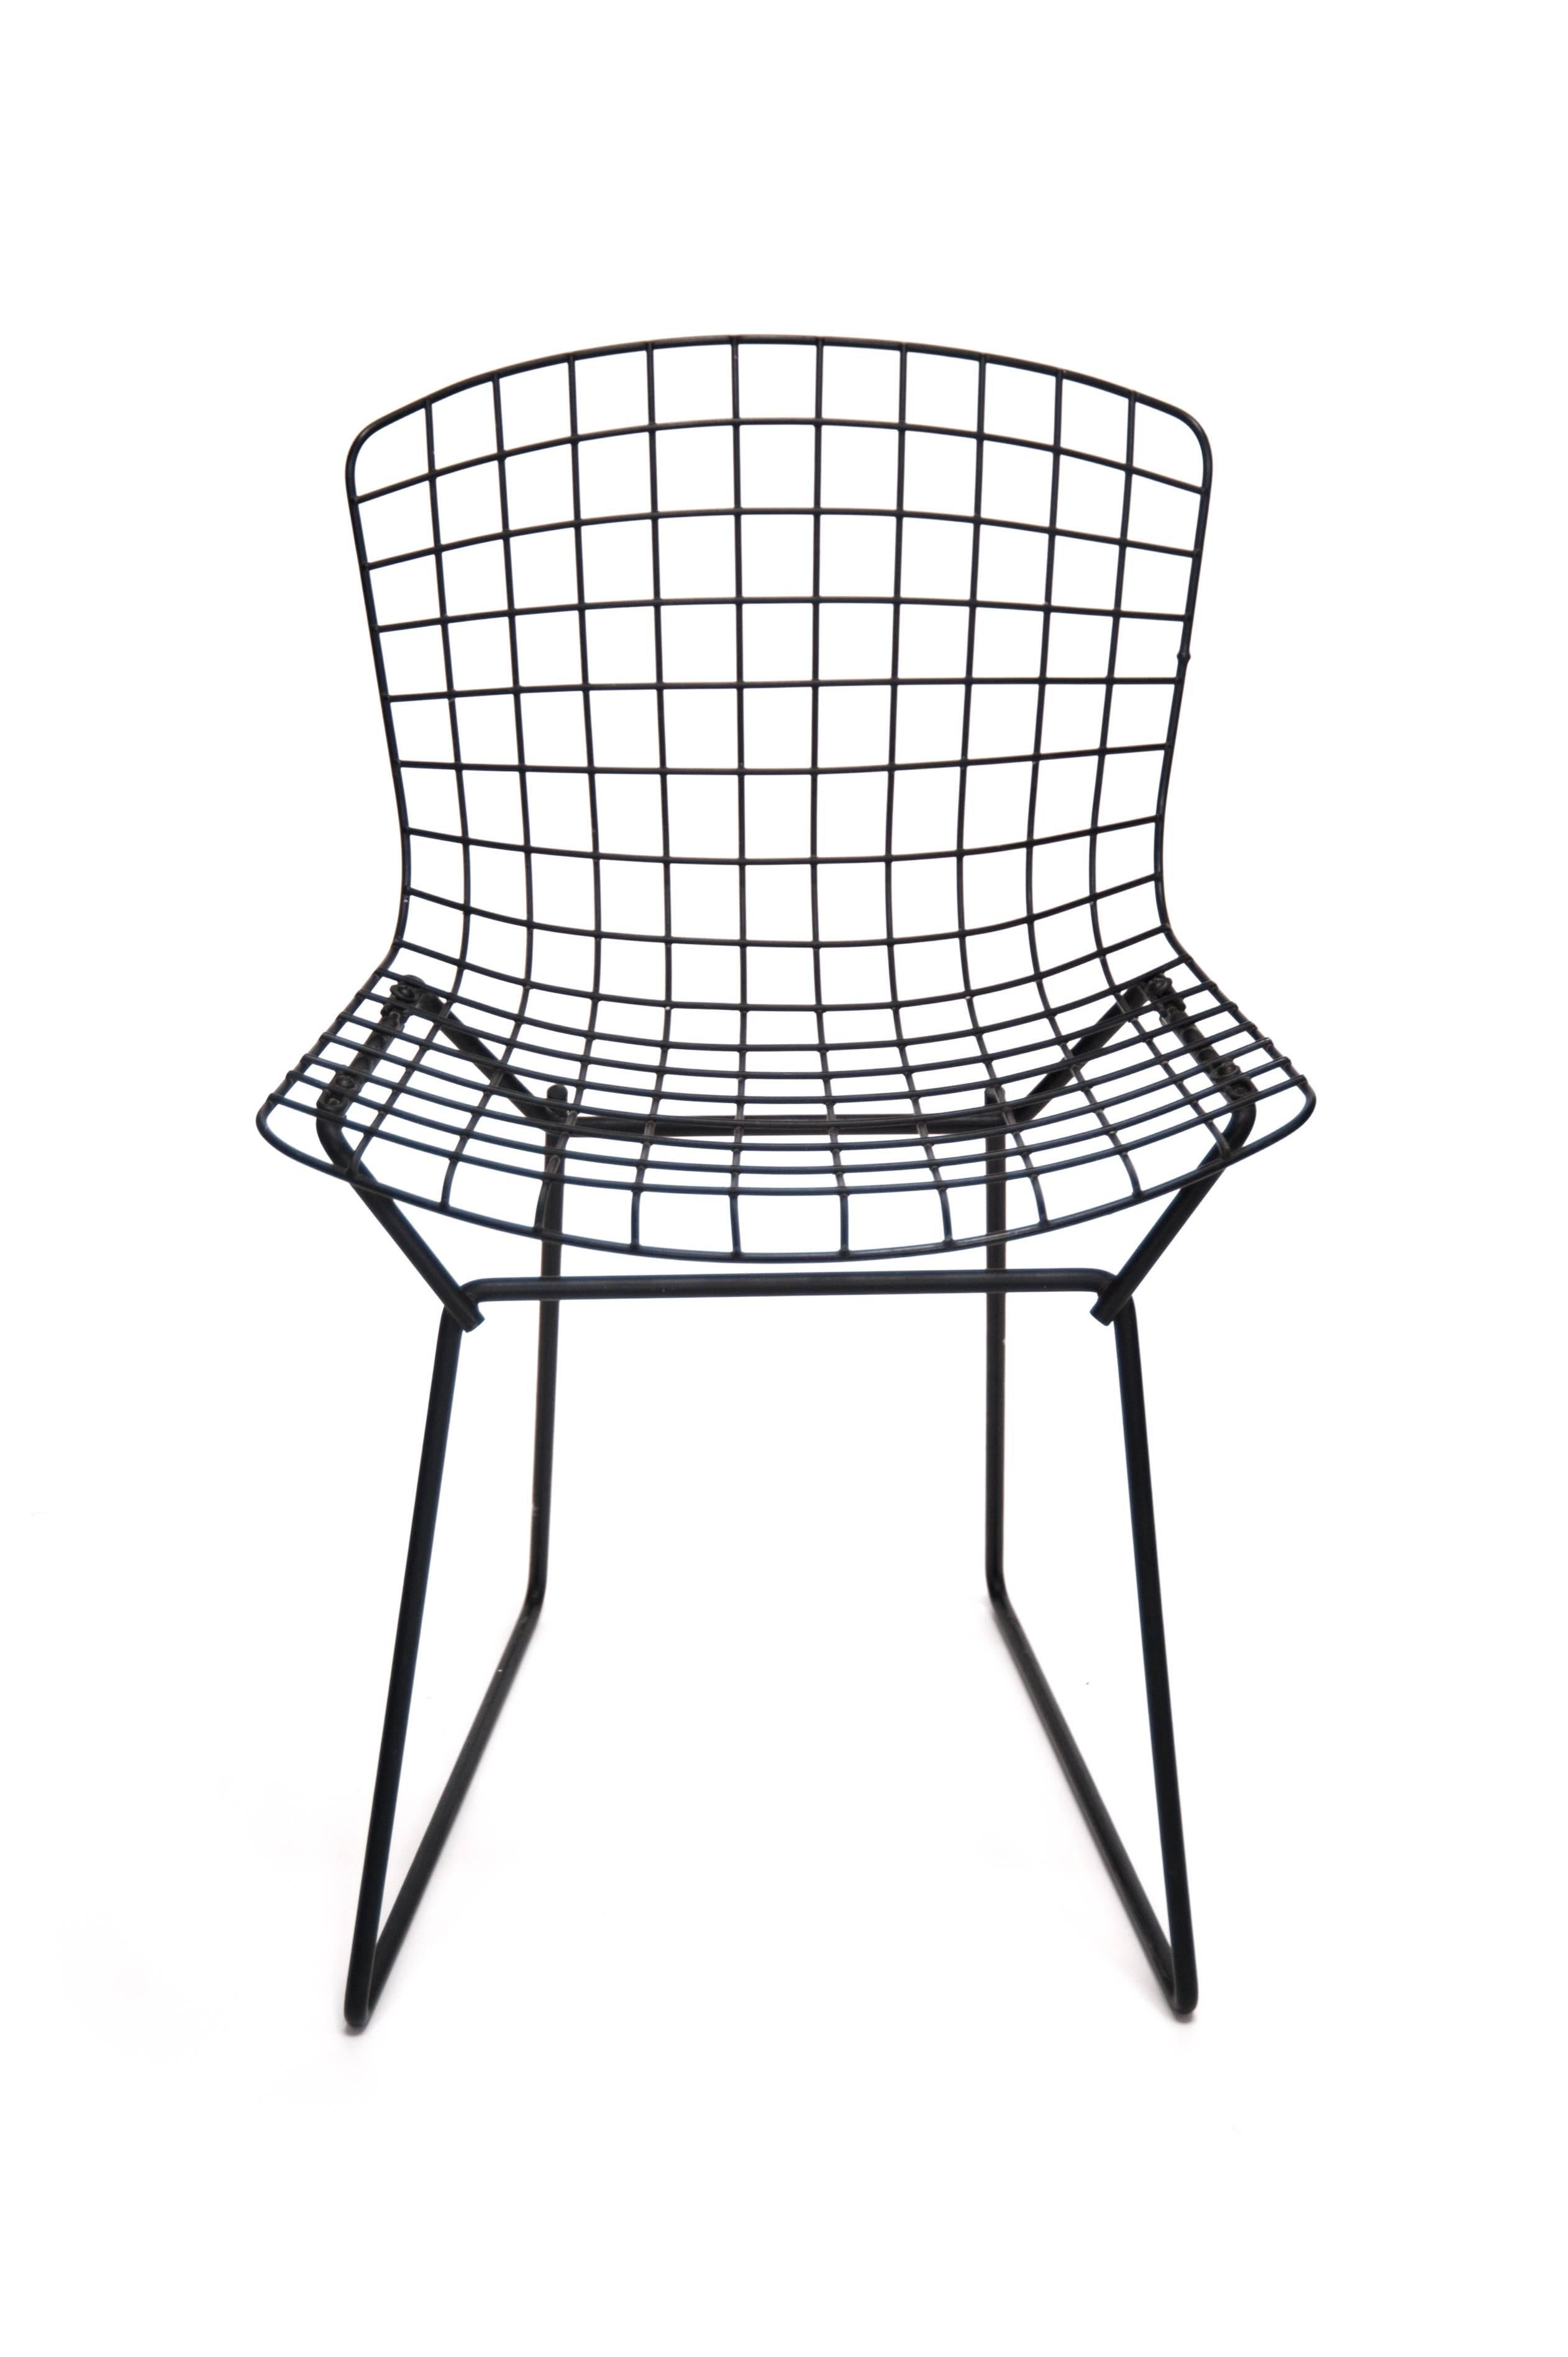 Bertoia child chair by Harry Bertoia for Knoll, USA, 1960s

Bertoia child chair
Harry Bertoia for Knoll, USA, 1960s
Powder coated steel
Measure: H 24.25 in, W 15.75 in, D 16.5 in (seat H 14.5 in).